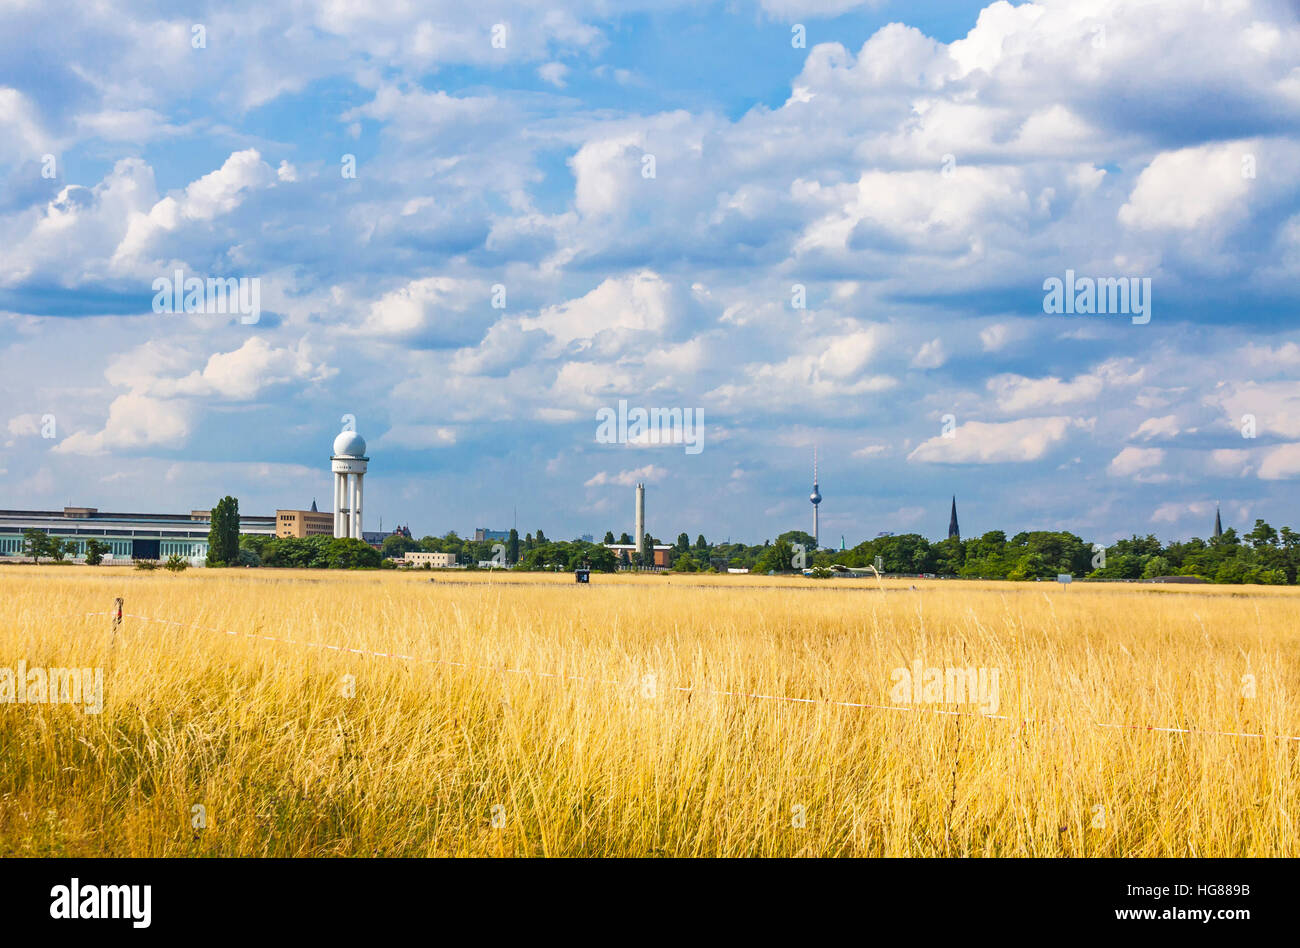 Berlin Tempelhof, former airport in Berlin city, Germany. Since 2008 used as a recreational space known as Tempelhofer Feld Stock Photo